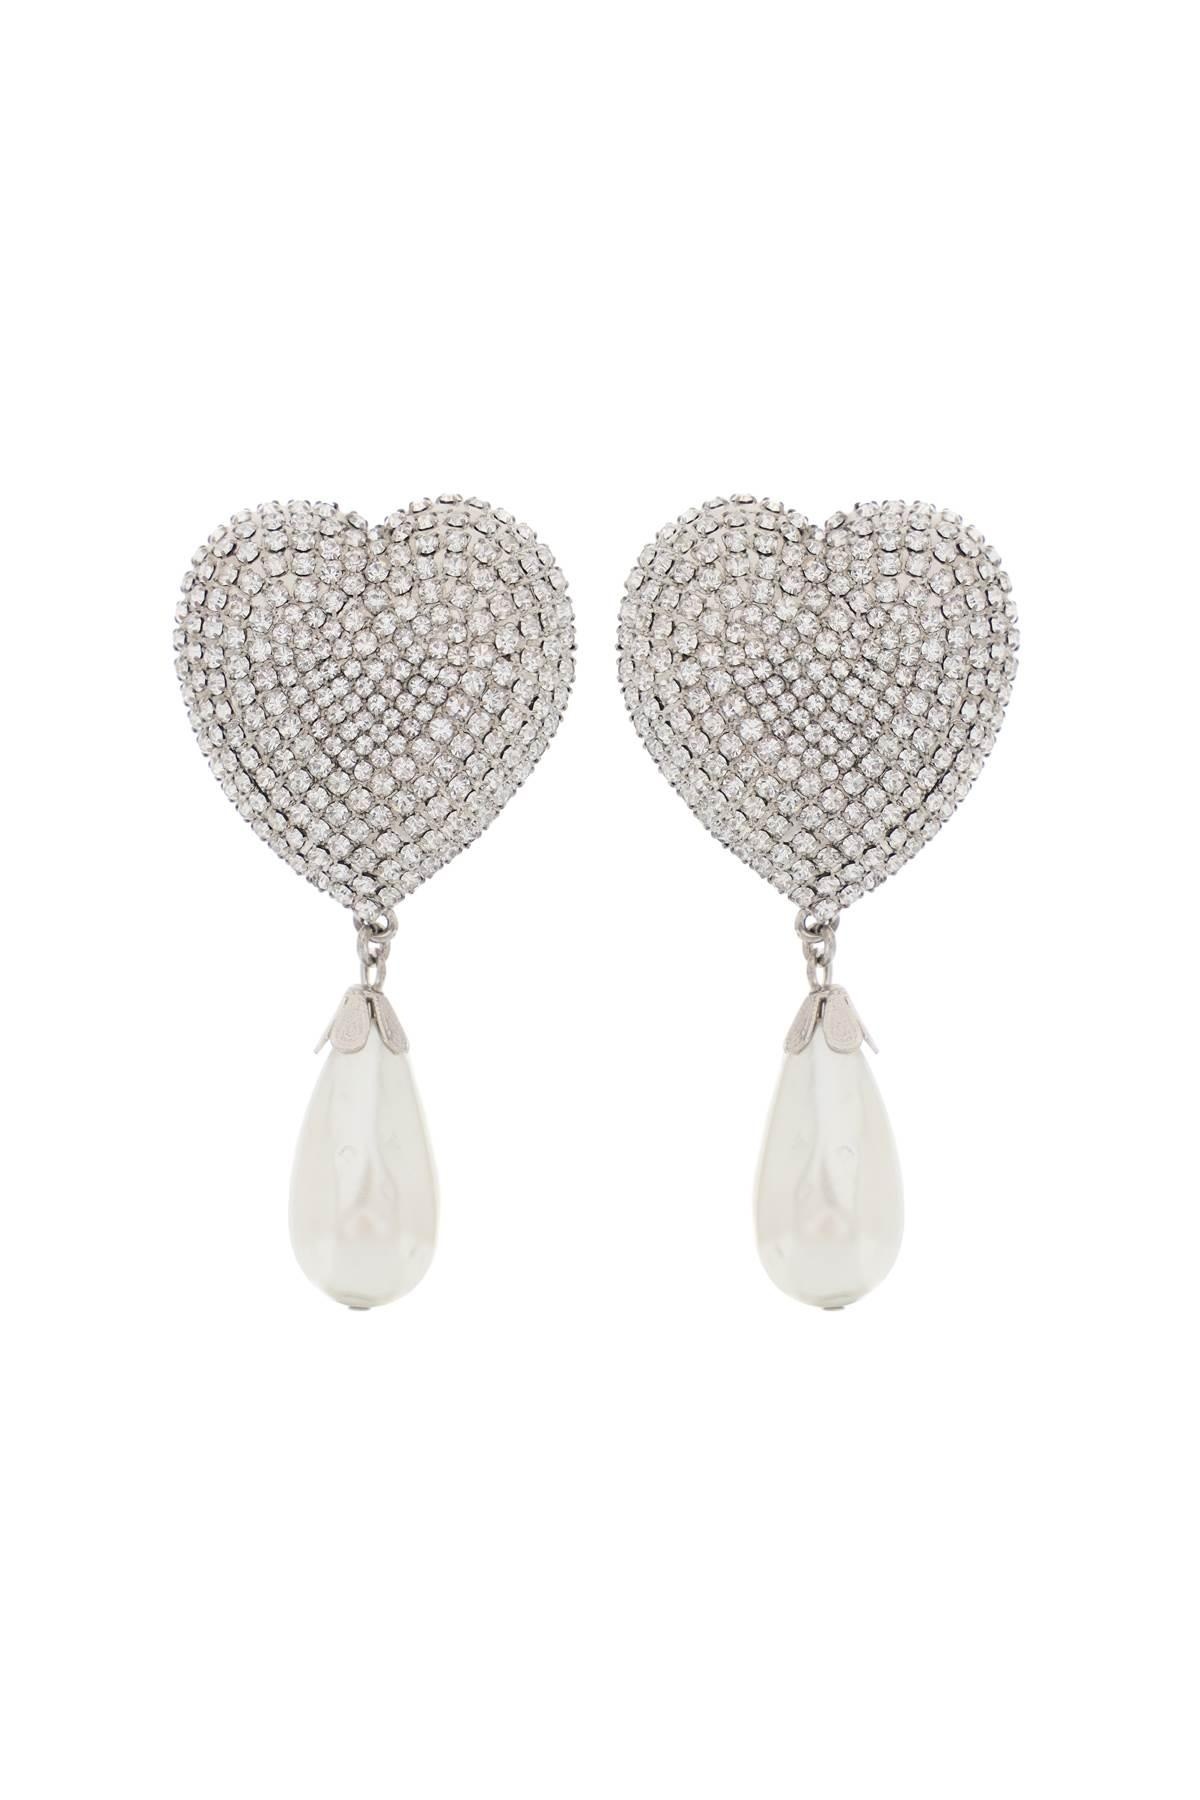 HEART CRYSTAL EARRINGS WITH PEARLS - 2